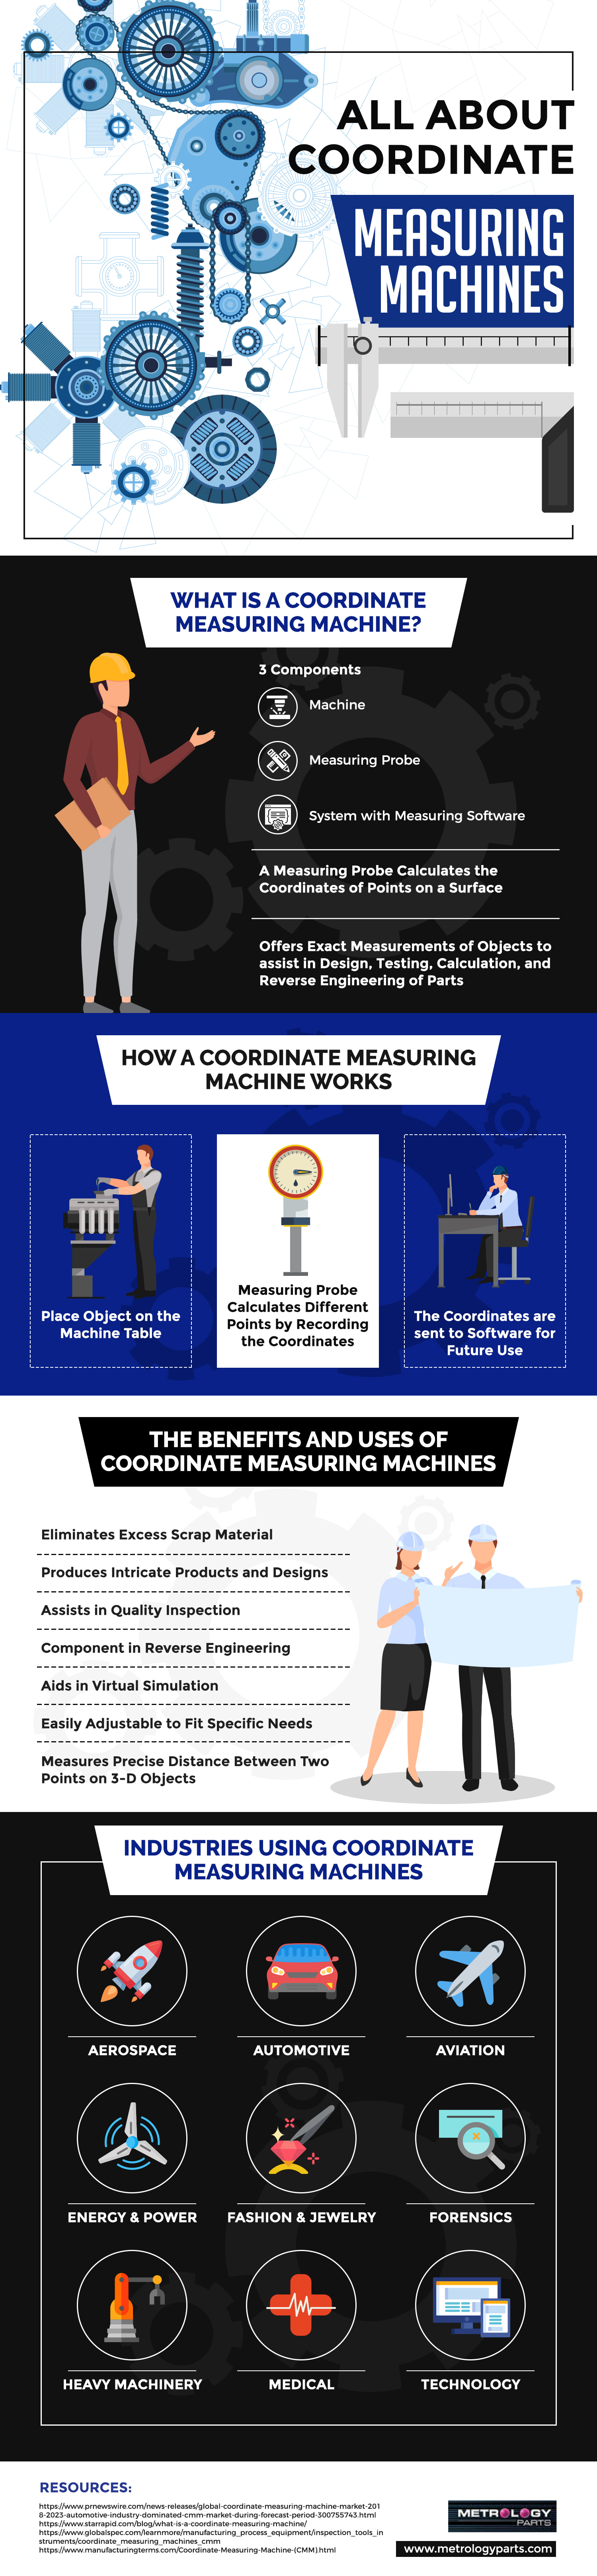 all-about-coordinate-measuring-machines.jpg